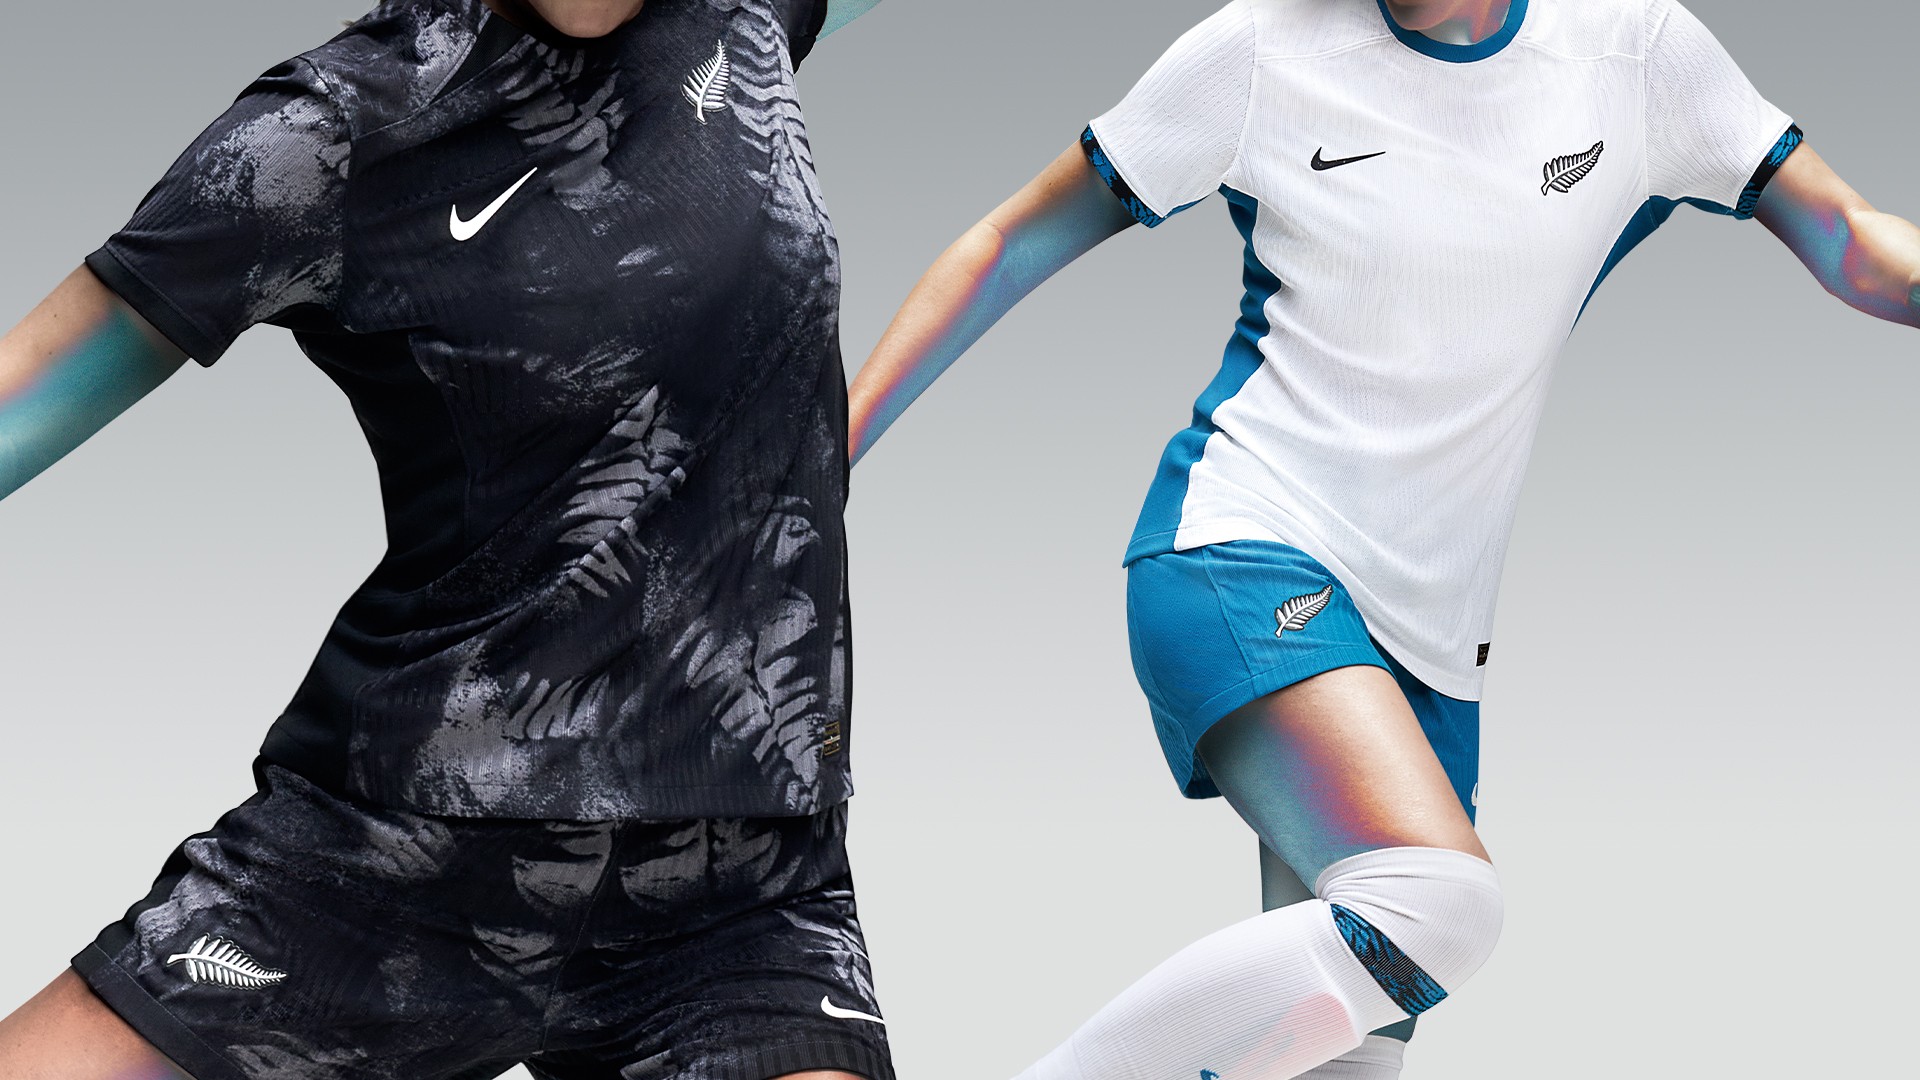 The new home and away kits, featuring black and blue shorts, respectively, of the New Zealand women's national soccer team. (Nike)